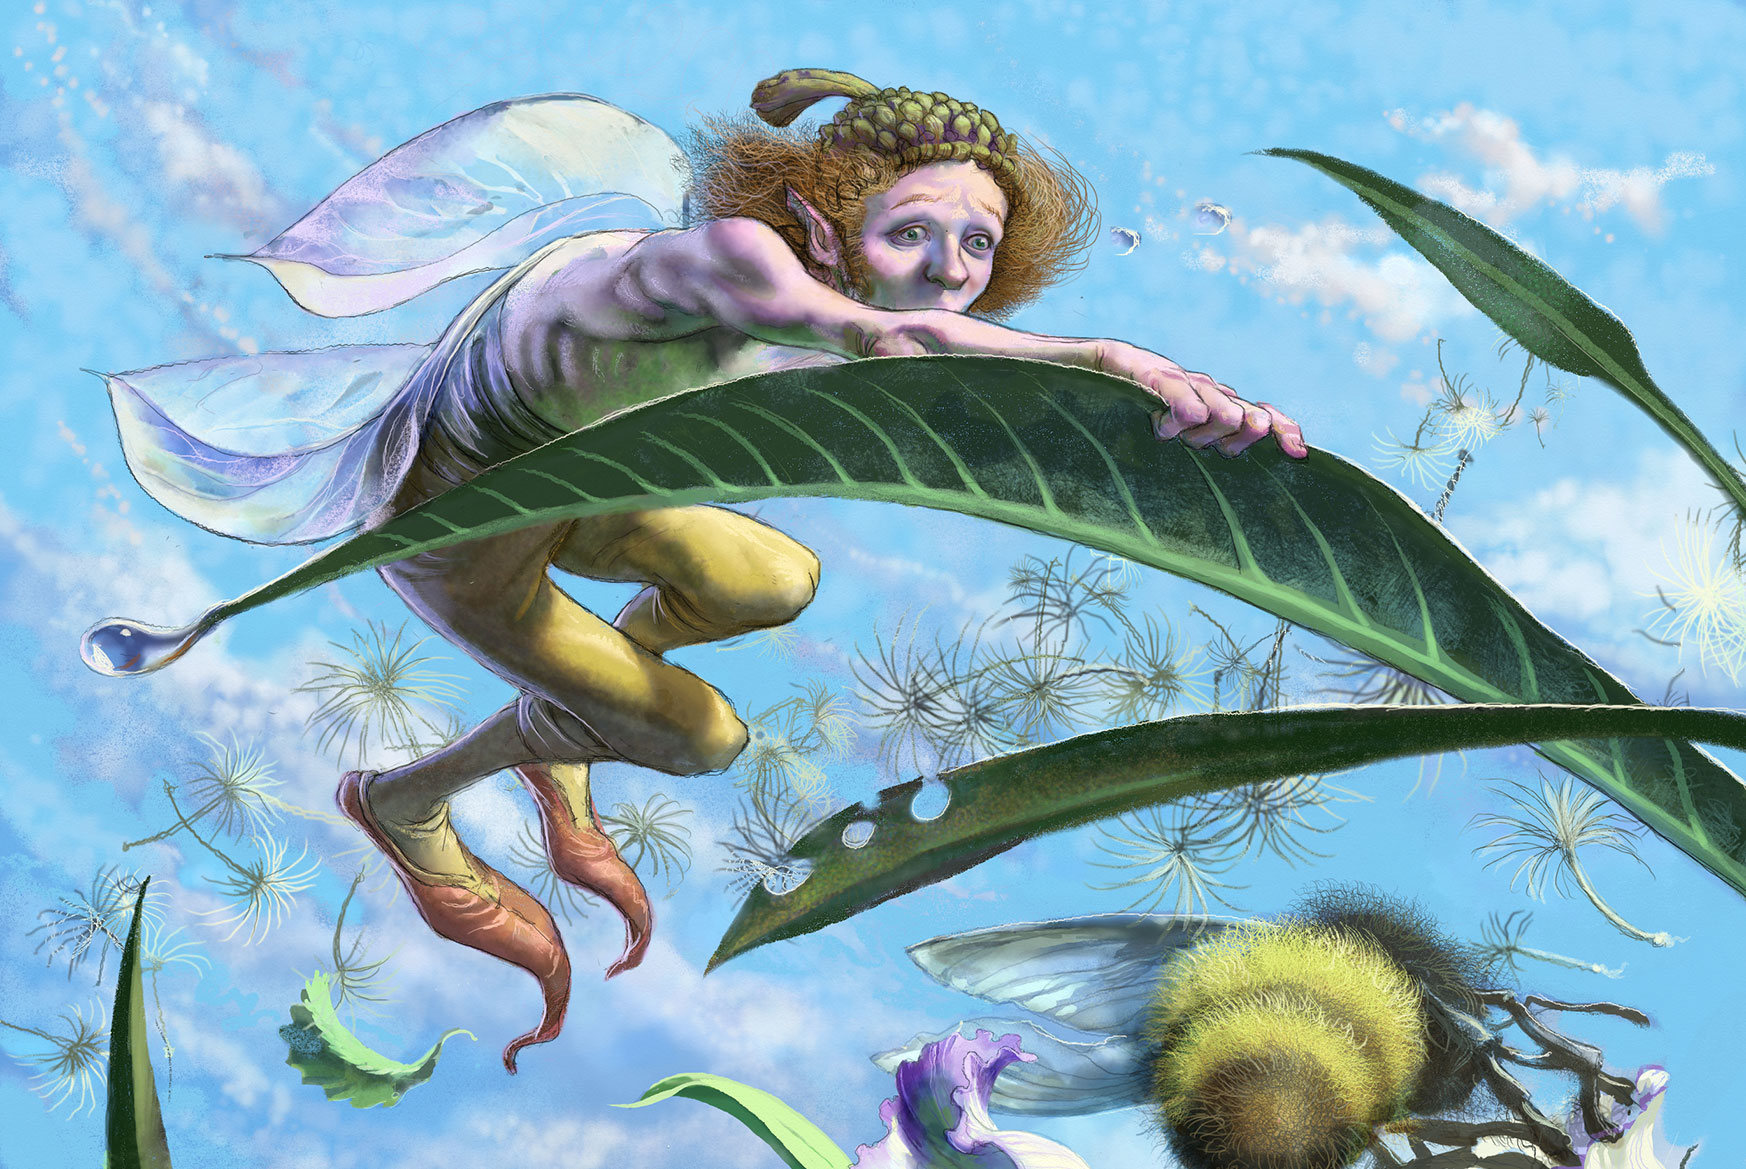 A fairy clinging tenaciously to a leaf to avoid being sucked up by a garden hoover. A bee holds tight in the foreground, another fairy is on the verge of letting go in the background